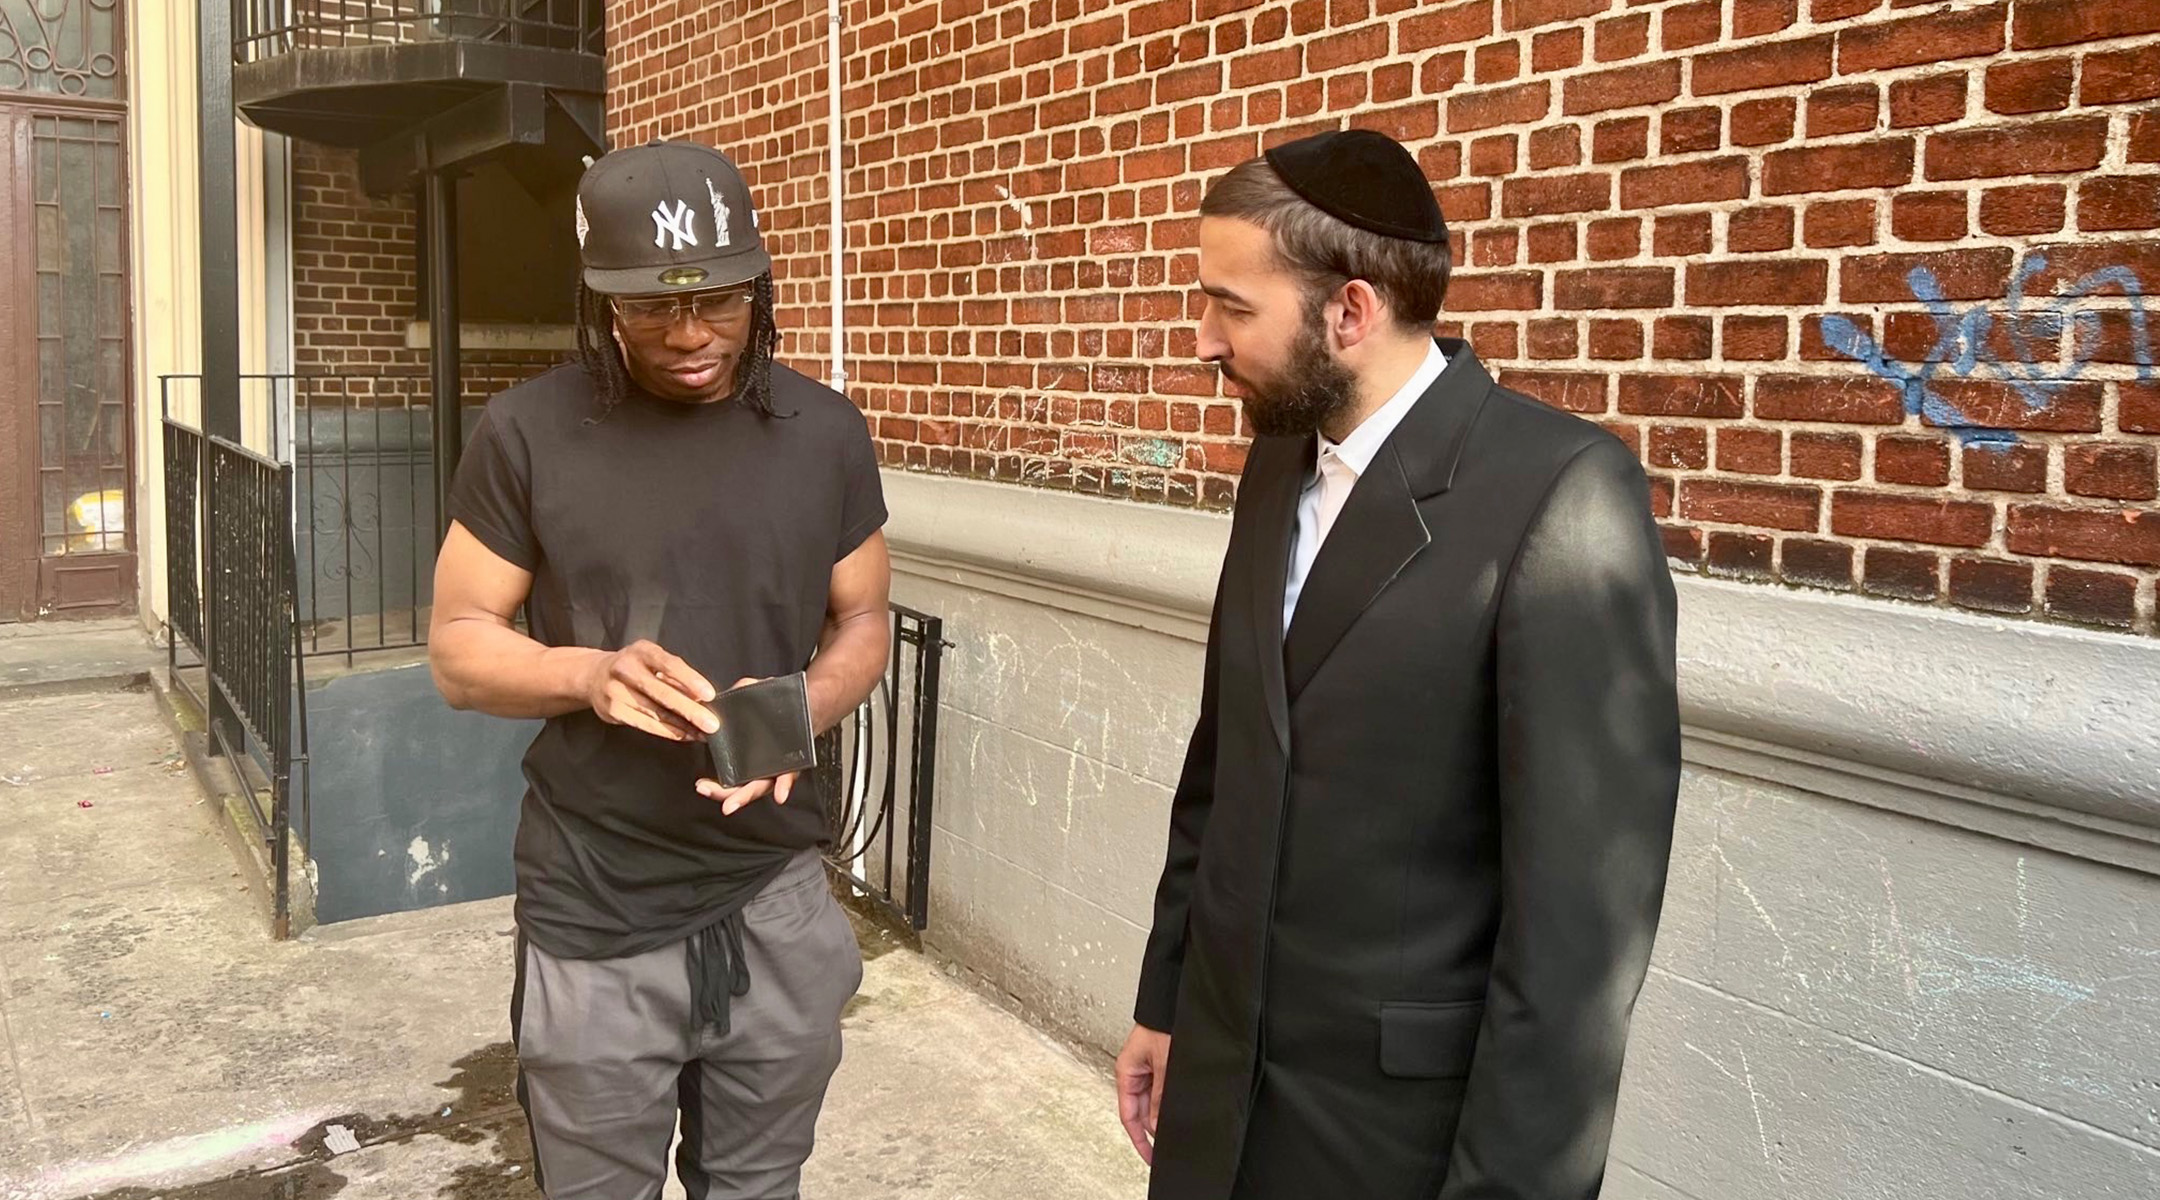 Bronx man who lost his wallet and $1,400 is grateful to Hasidic family that returned it